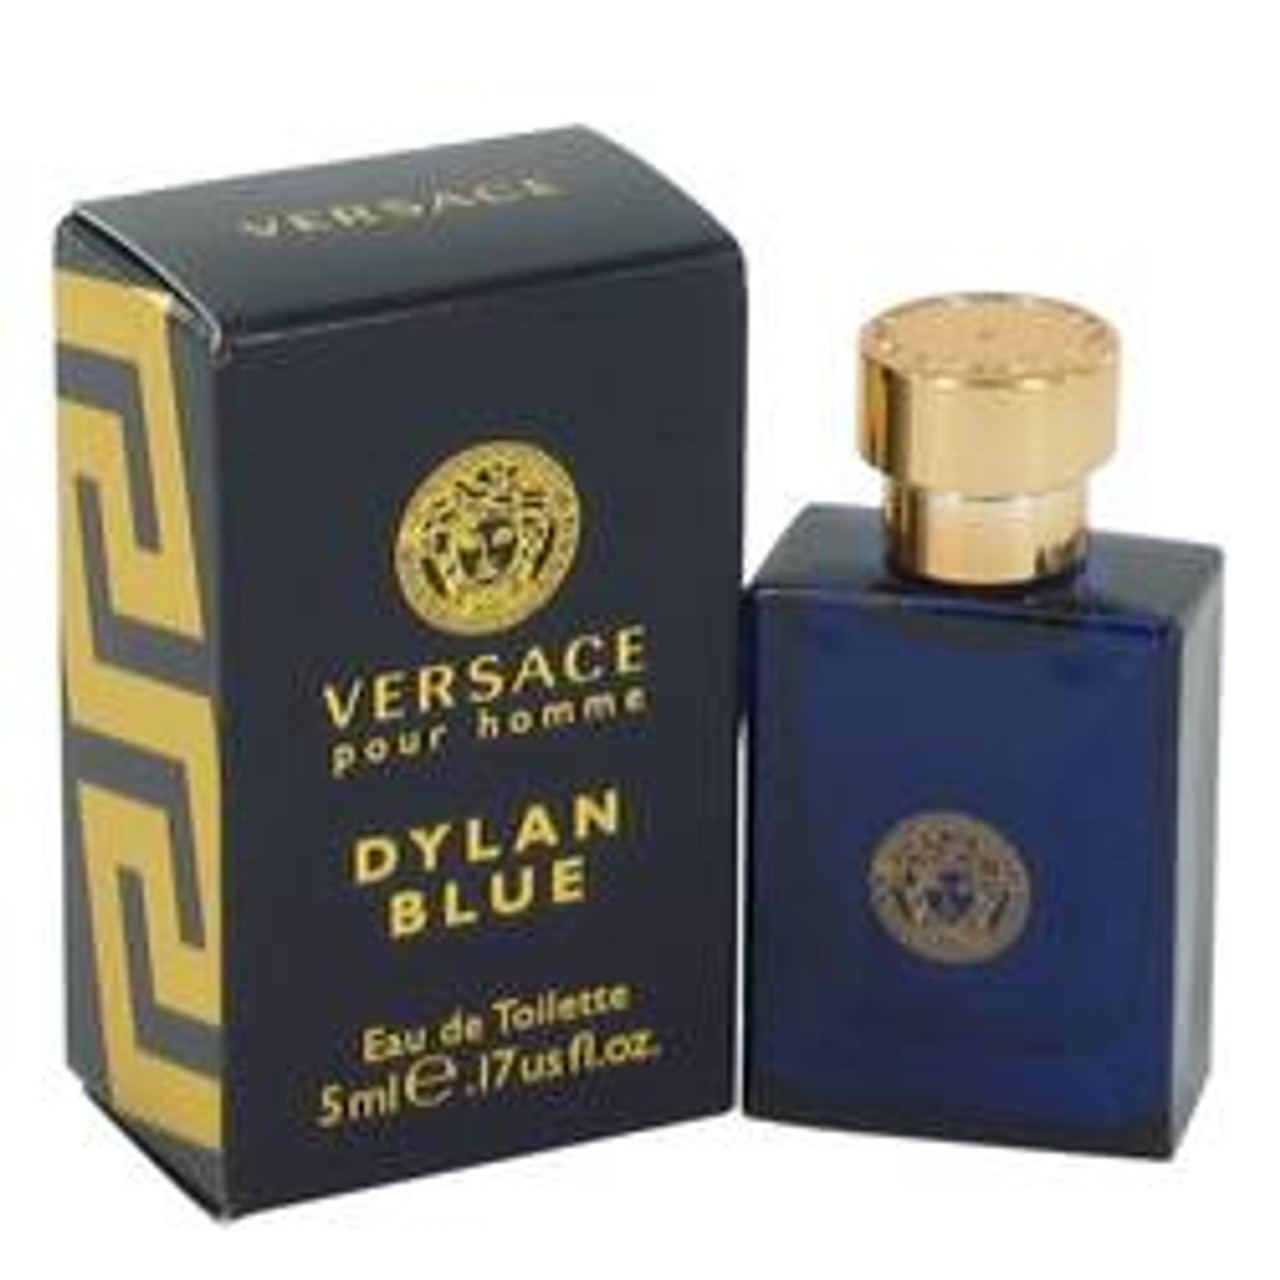 Versace Pour Homme Dylan Blue Cologne By Versace Mini EDT 0.17 oz for Men - [From 23.00 - Choose pk Qty ] - *Ships from Miami